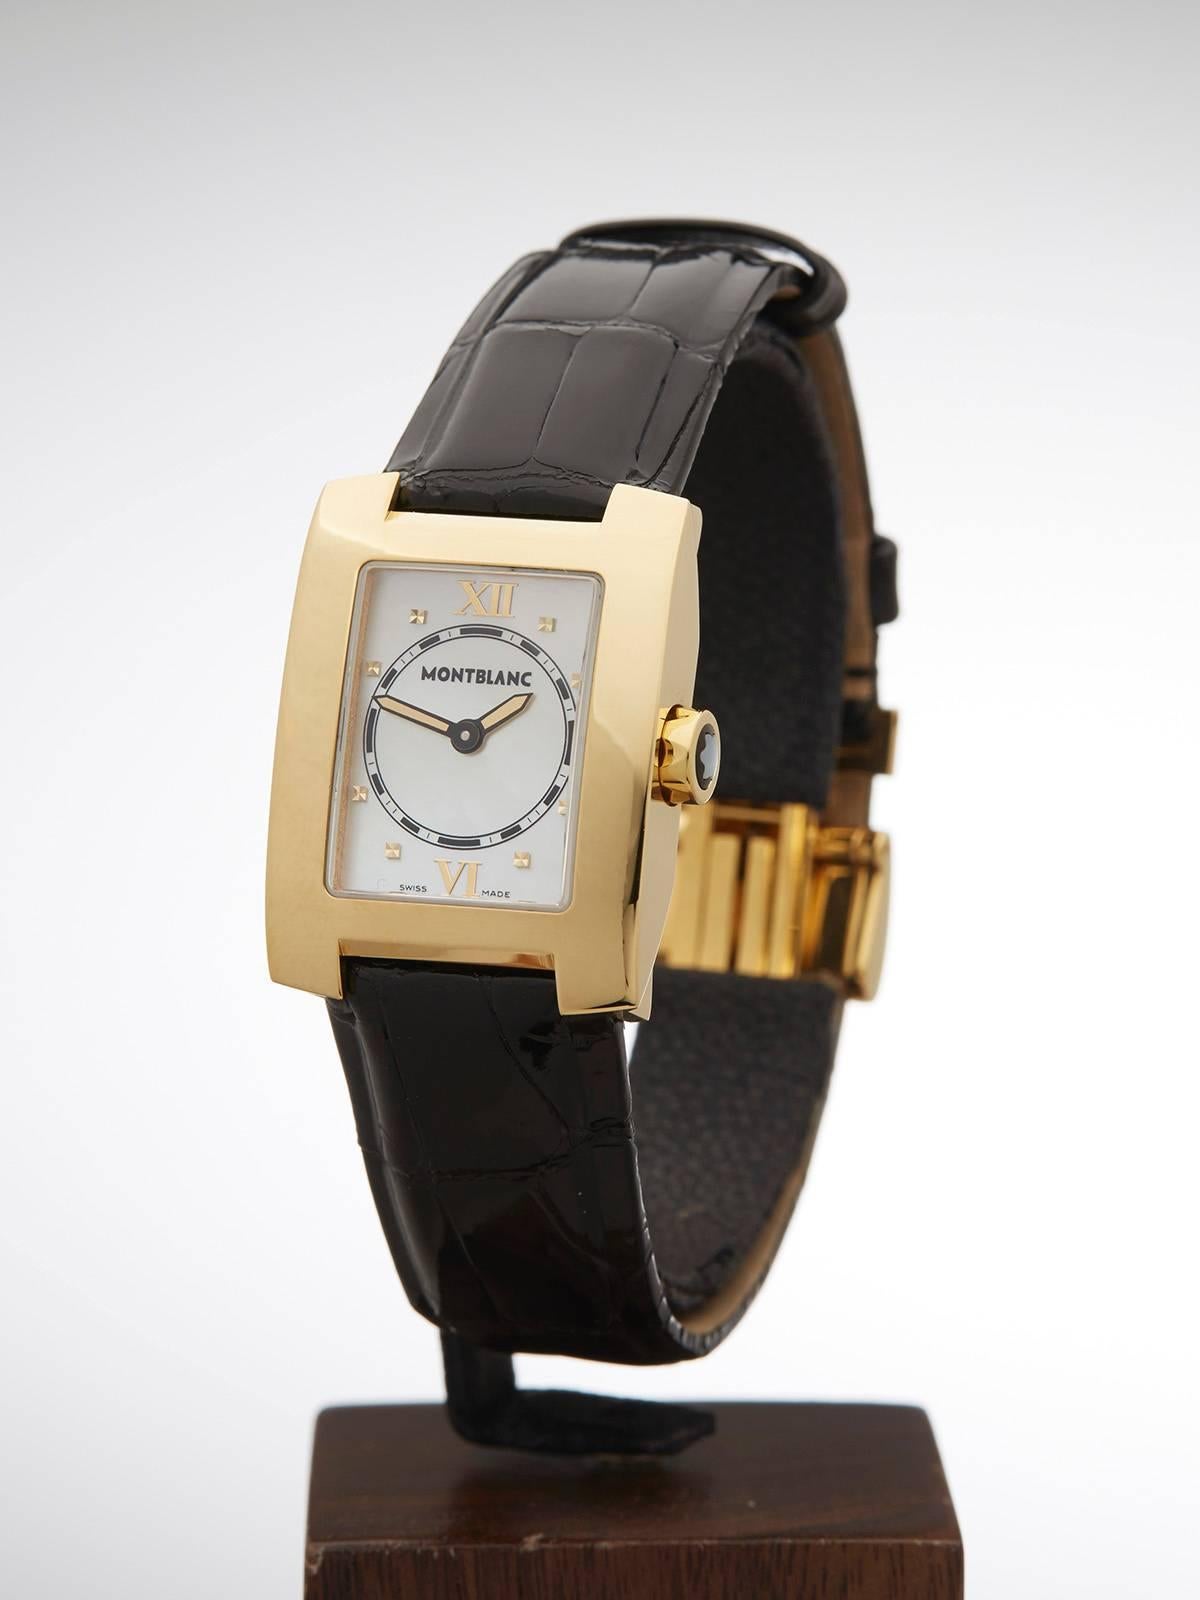 Specifications

Movement: Quartz
Case: 18k Yellow Gold 
Case Diameter: 23mm 
Dial: White Mother Of Pearl 
Bracelet: Black Crocodile Leather 
Strap Length: Adjustable up to 17cm 
Strap Width: At Case - 18mm/At Buckle - 14mm 
Buckle: